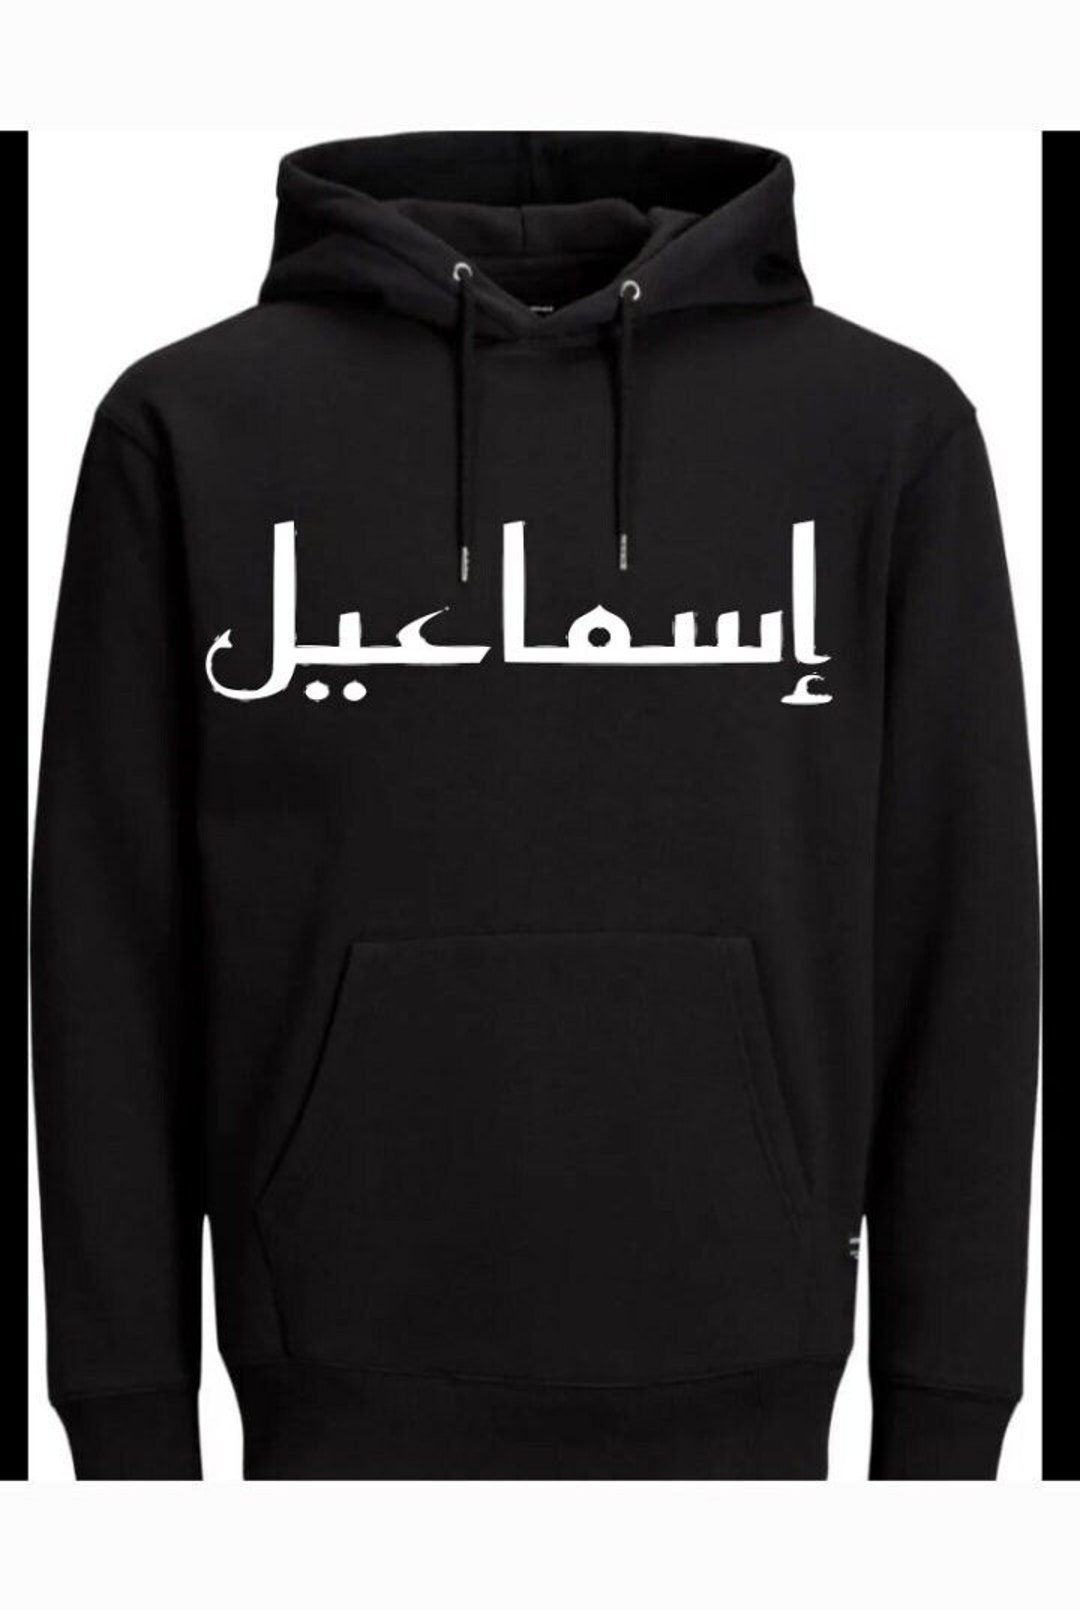 Customise Your Name in Arabic - Etsy